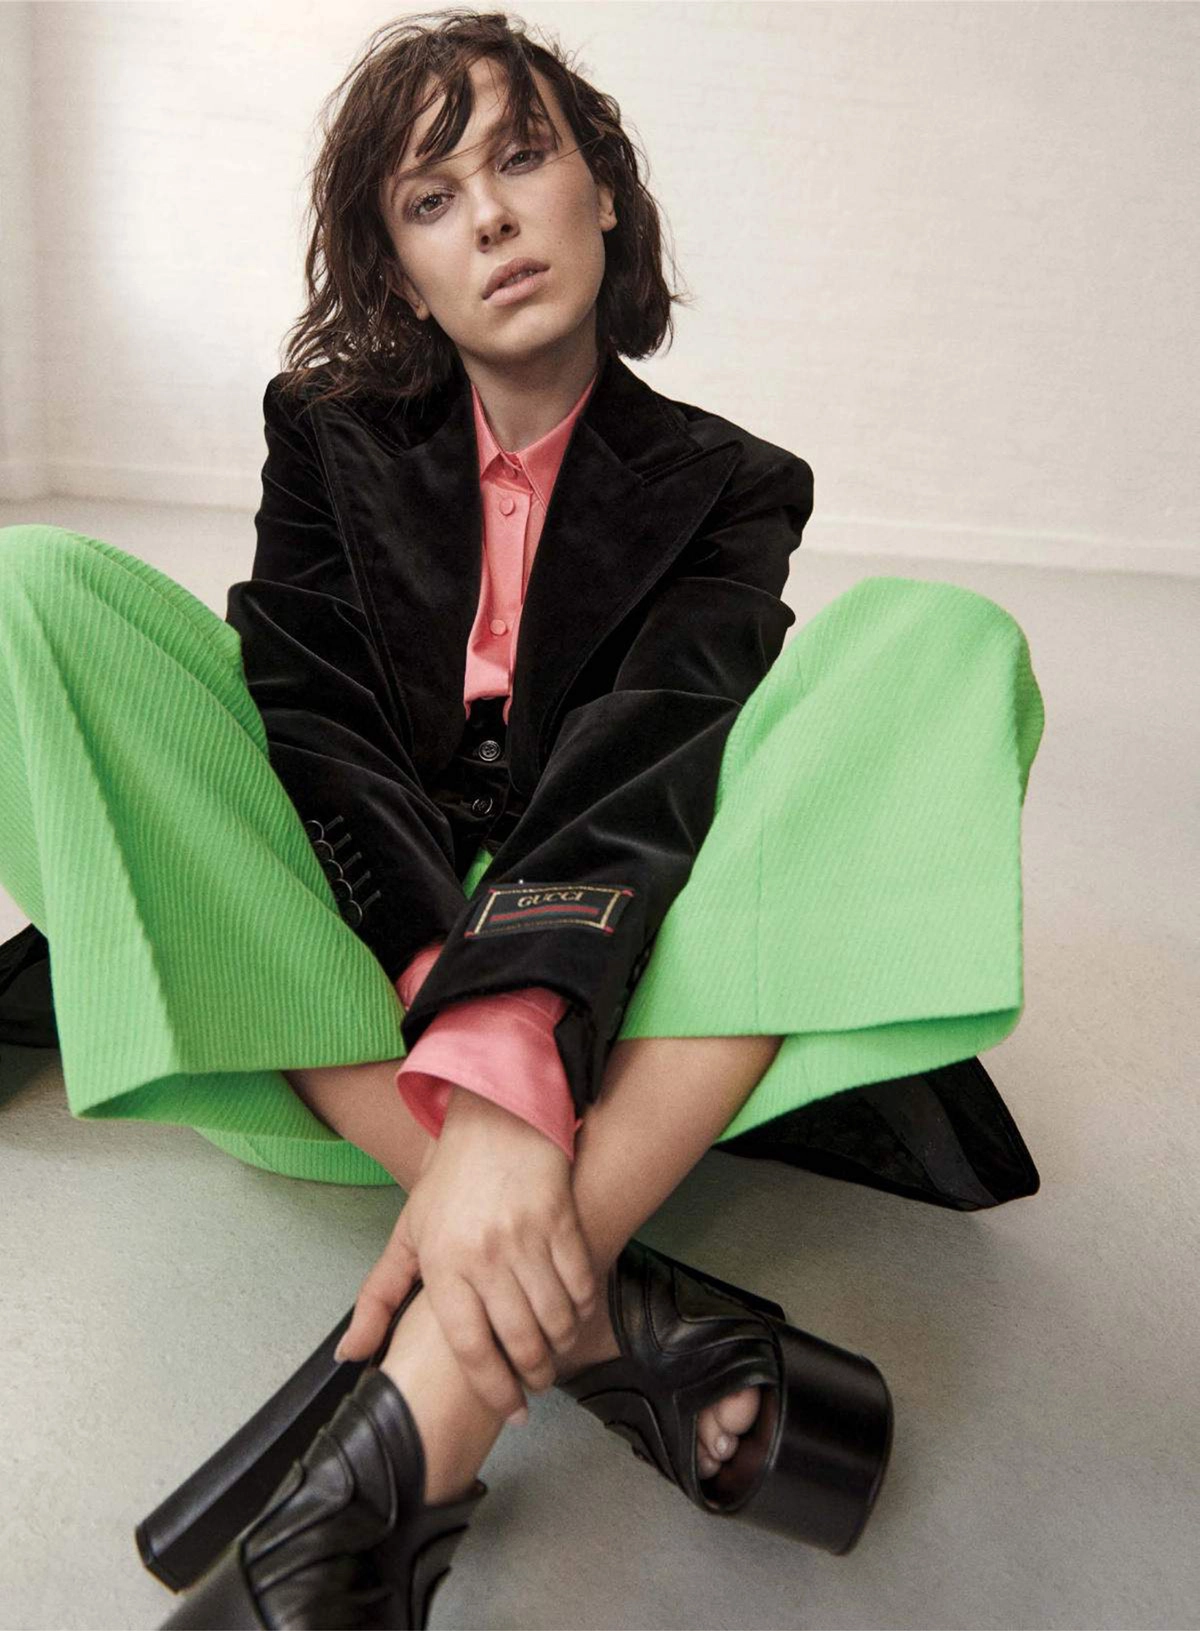 Millie Bobby Brown covers Vogue Mexico & Latin America June 2022 by Claudia Knoepfel